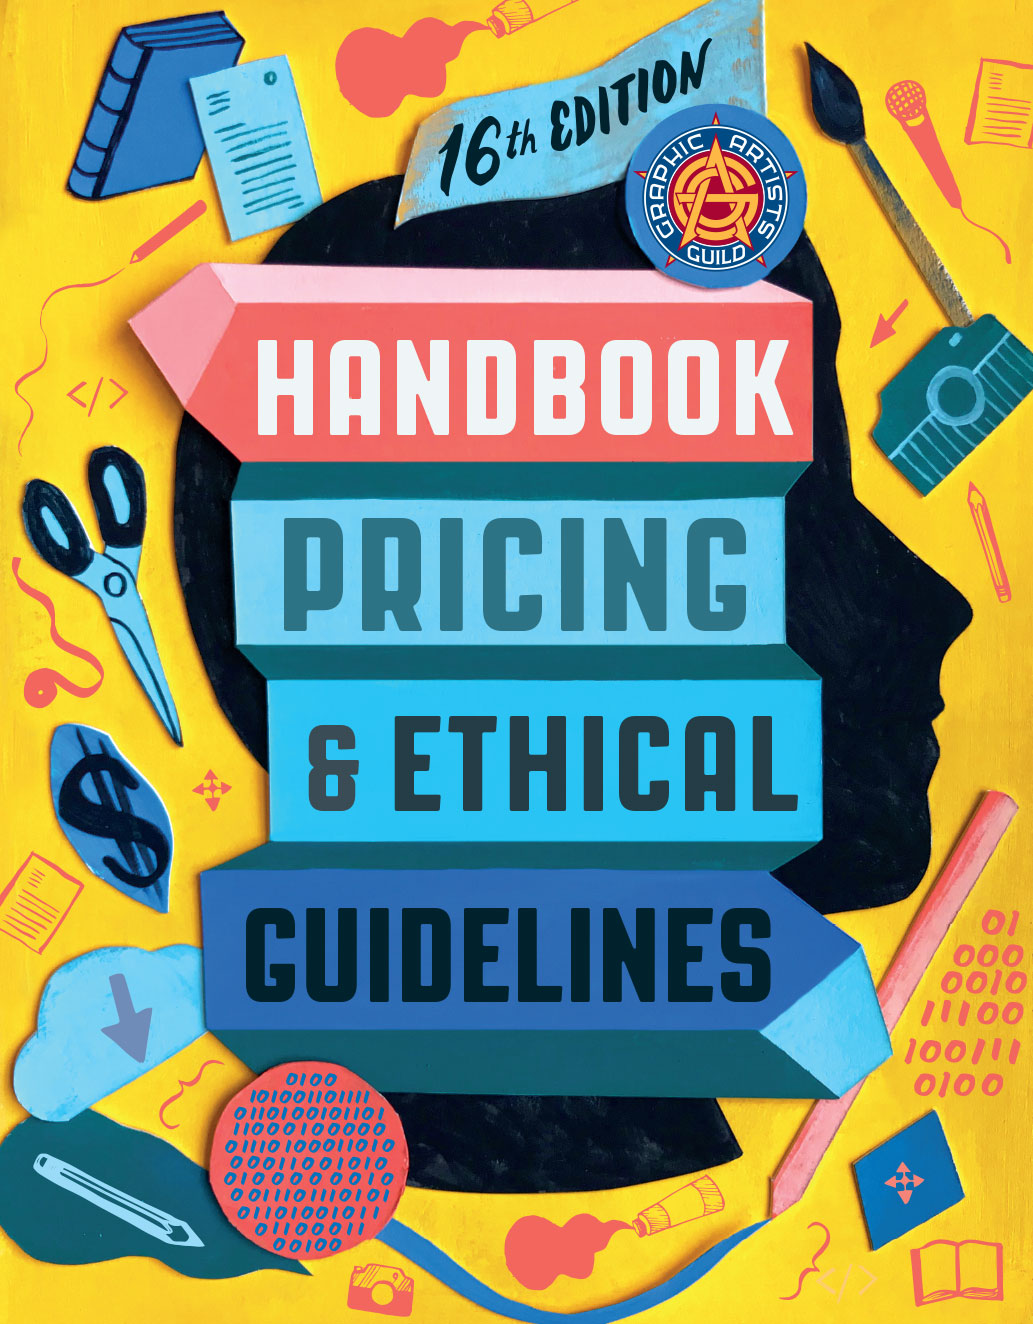 The Handbook: Pricing & Ethical Guidelines – 16th Edition